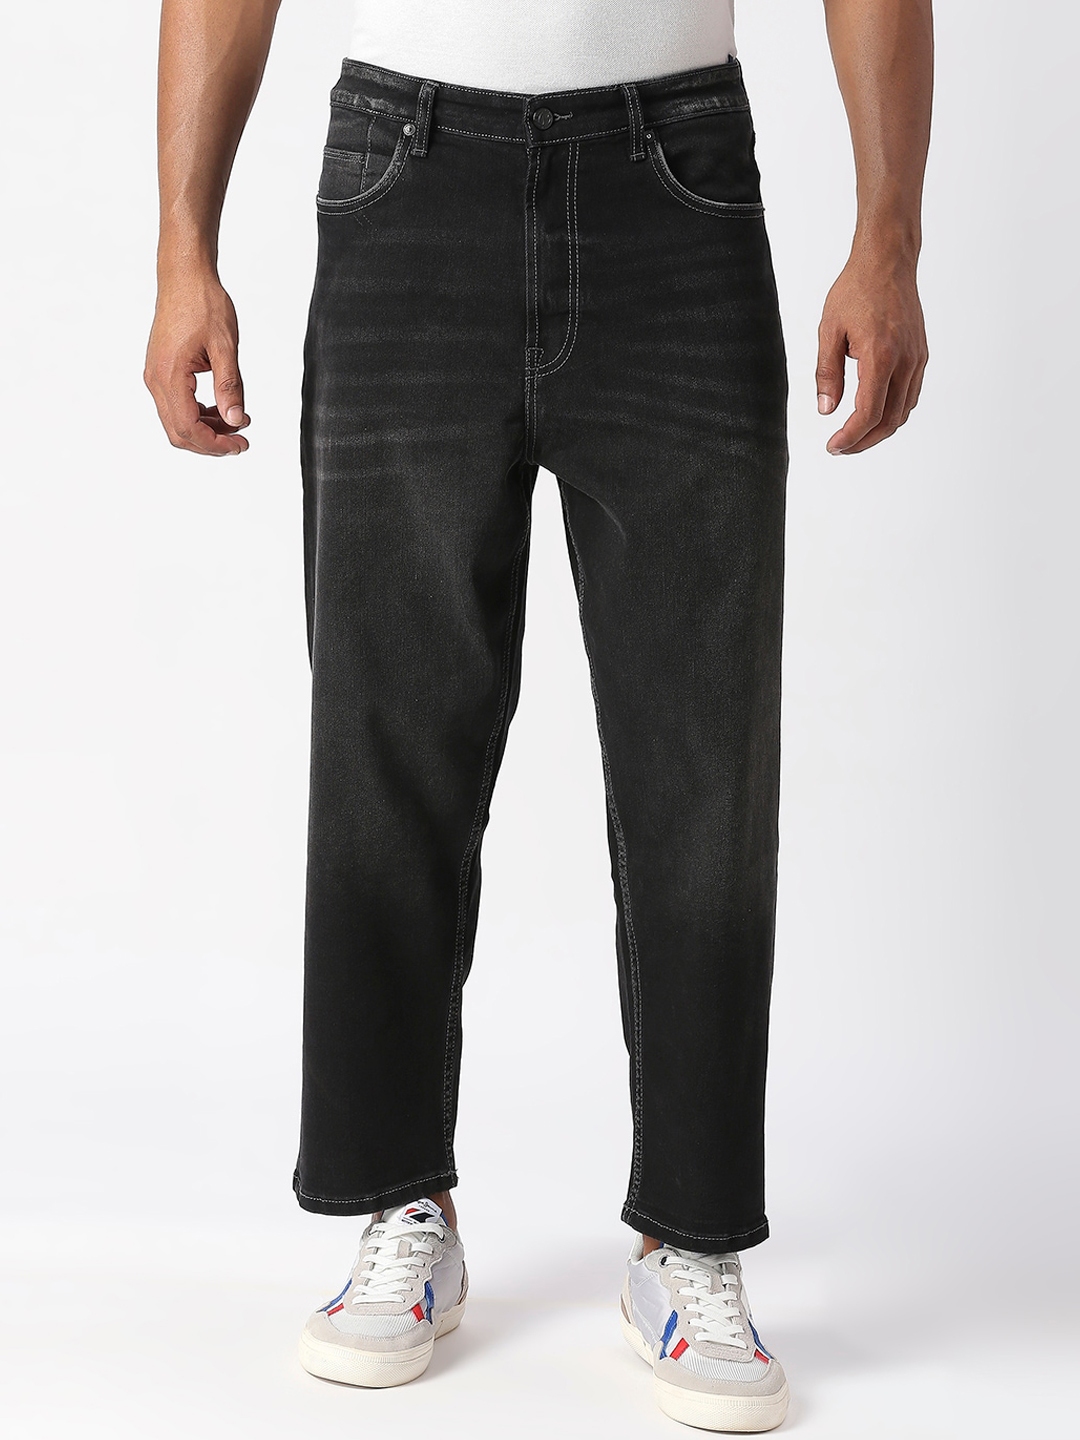 Buy Pepe Jeans Men Relaxed Fit Light Fade Jeans - Jeans for Men ...